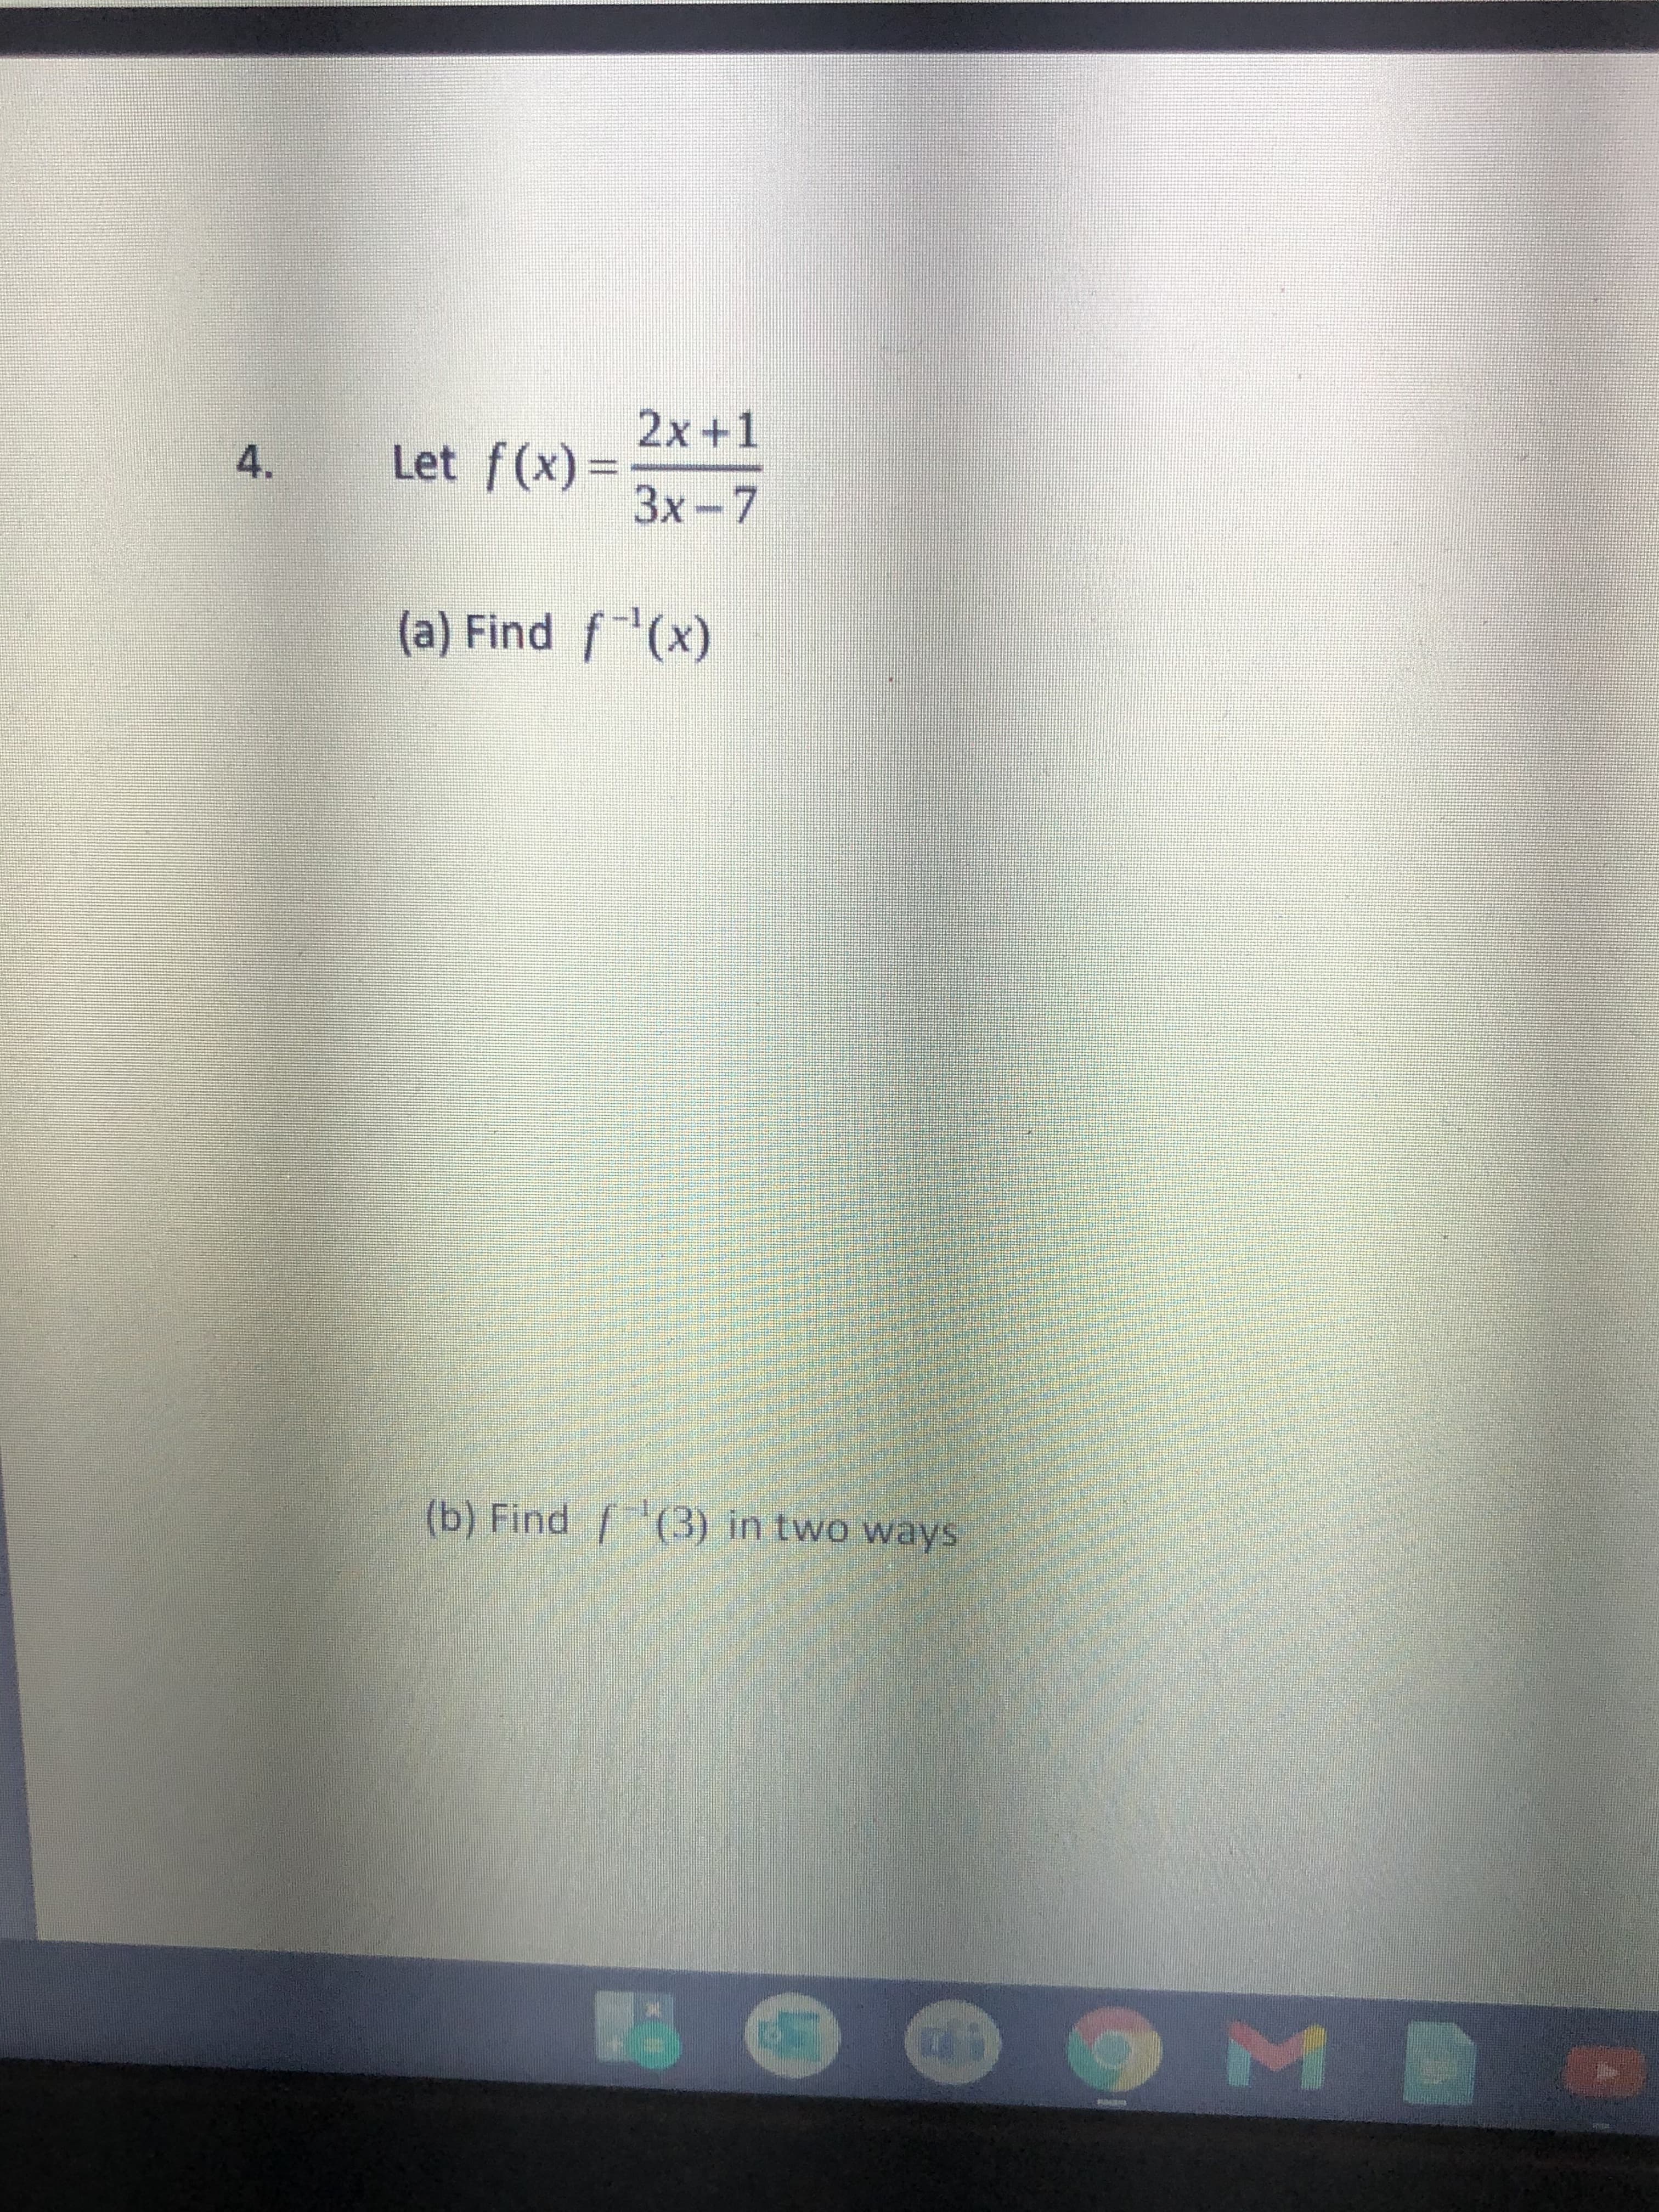 2x+1
Let f(x)=
3x-7
4.
(a) Find f(x)
